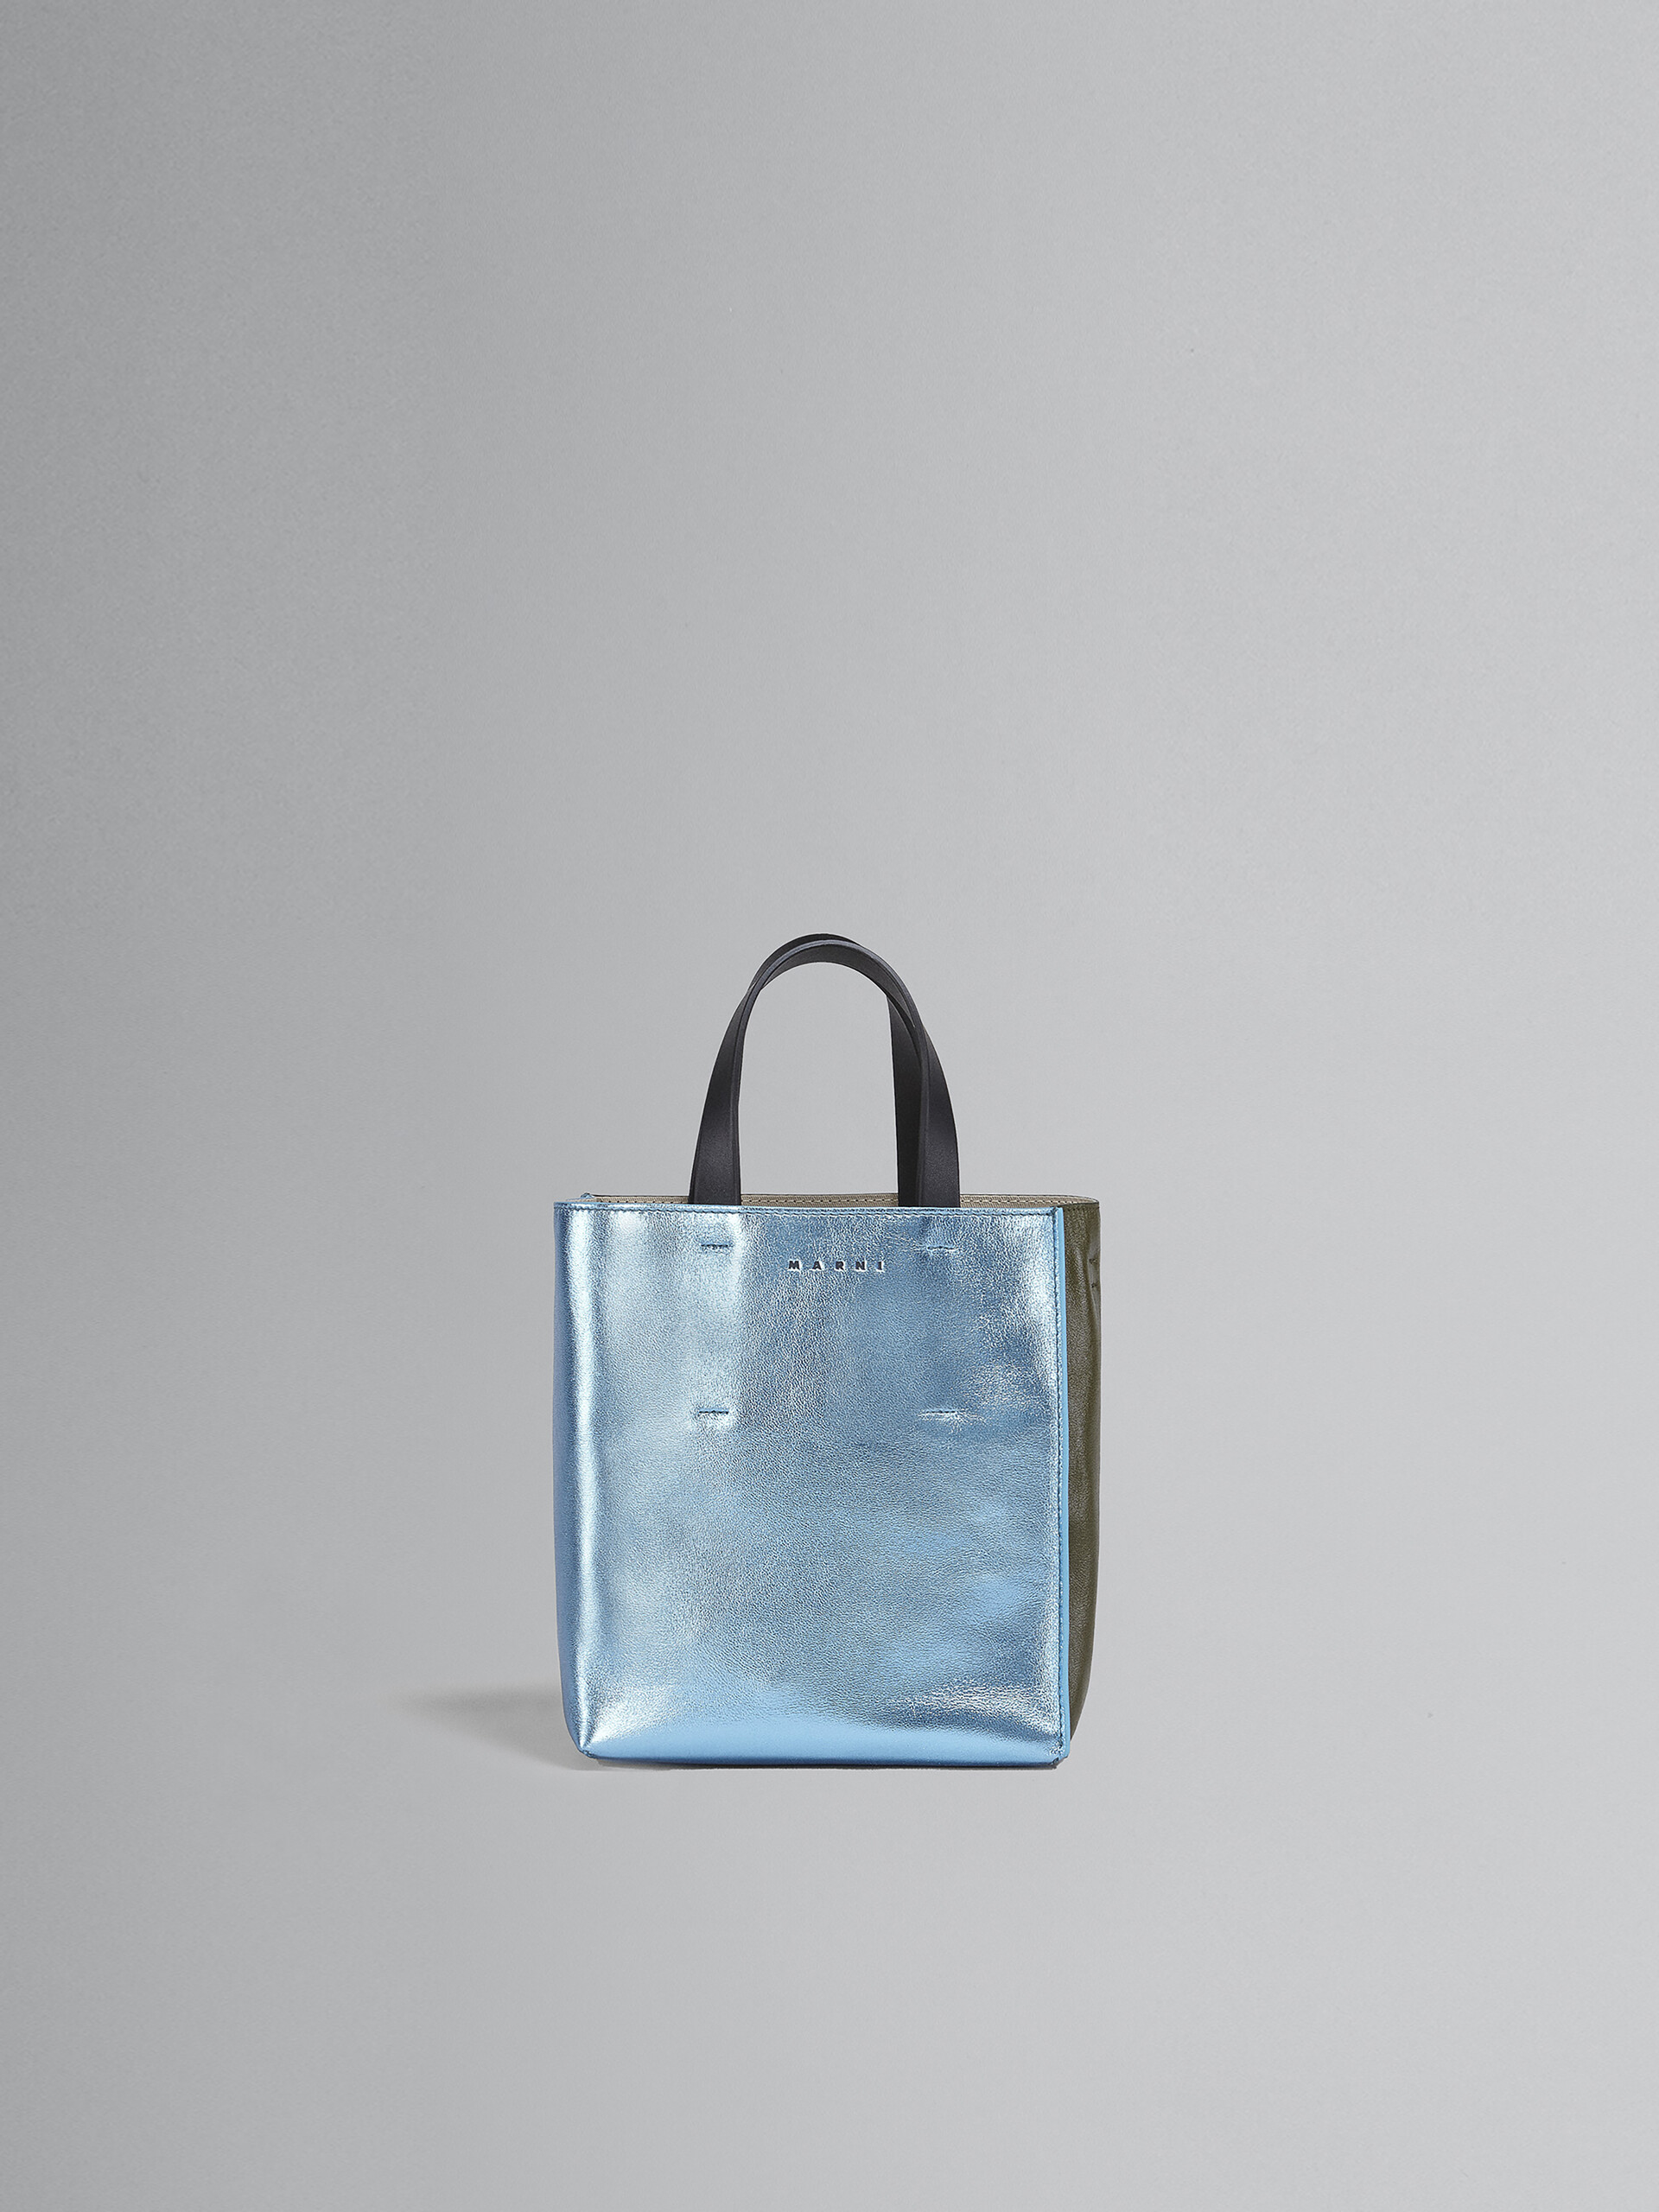 Pale blue green and black metallic leather MUSEO bag - Shopping Bags - Image 1